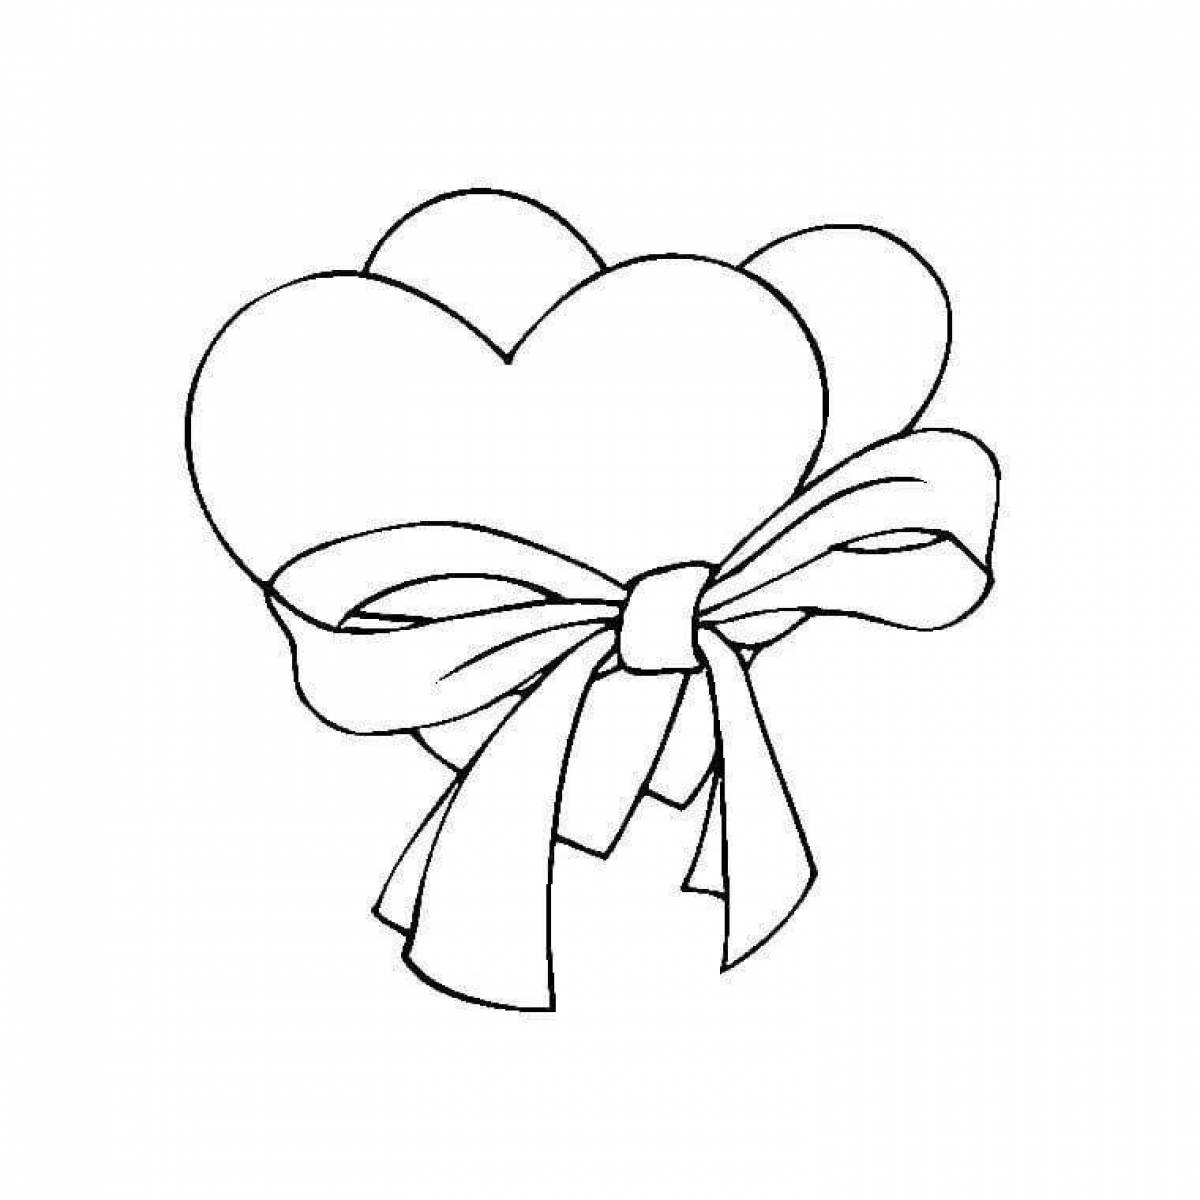 Coloring sweet bow